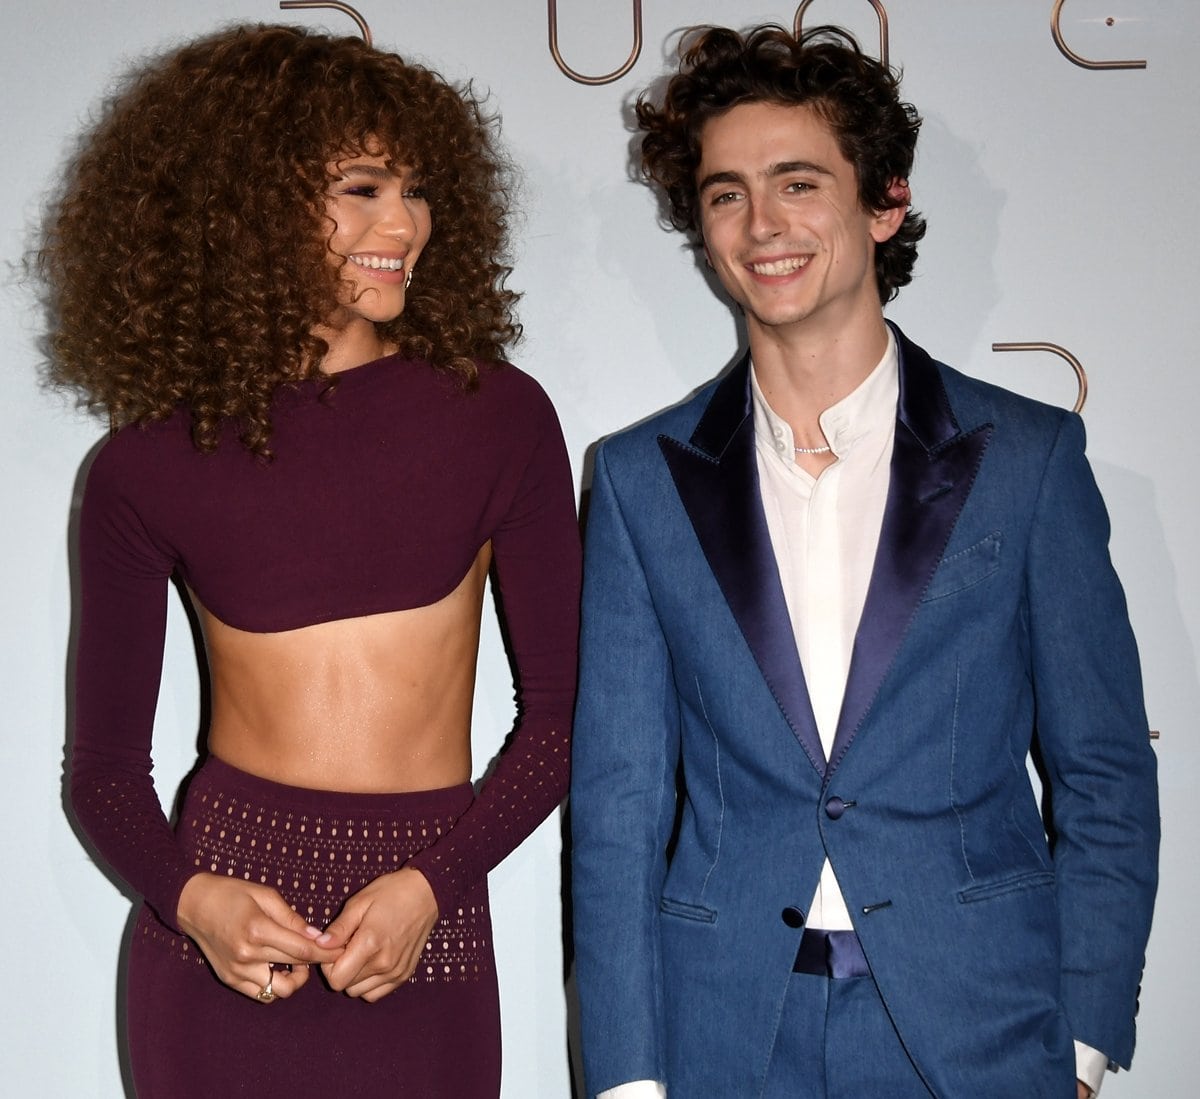 Zendaya in a two-piece knitted look from Alaia’s Spring 2022 collection and Timothée Chalamet in Tom Ford at the premiere of Dune at Le Grand Rex